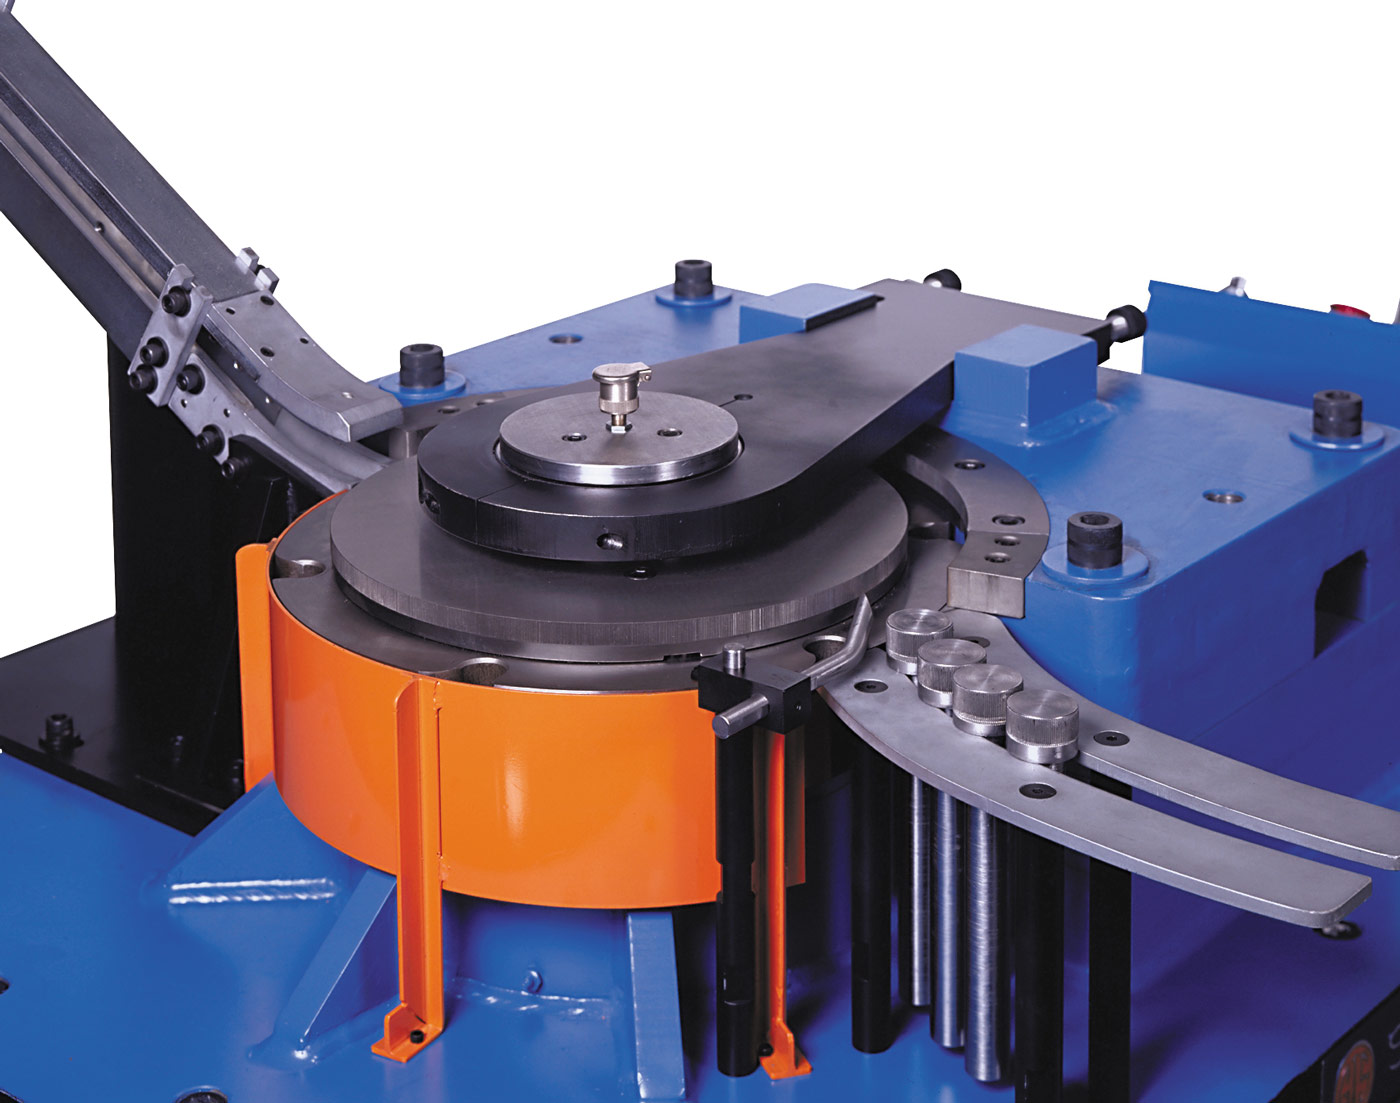 Types of Traditional Marking: Rotary Roll Marking Machines